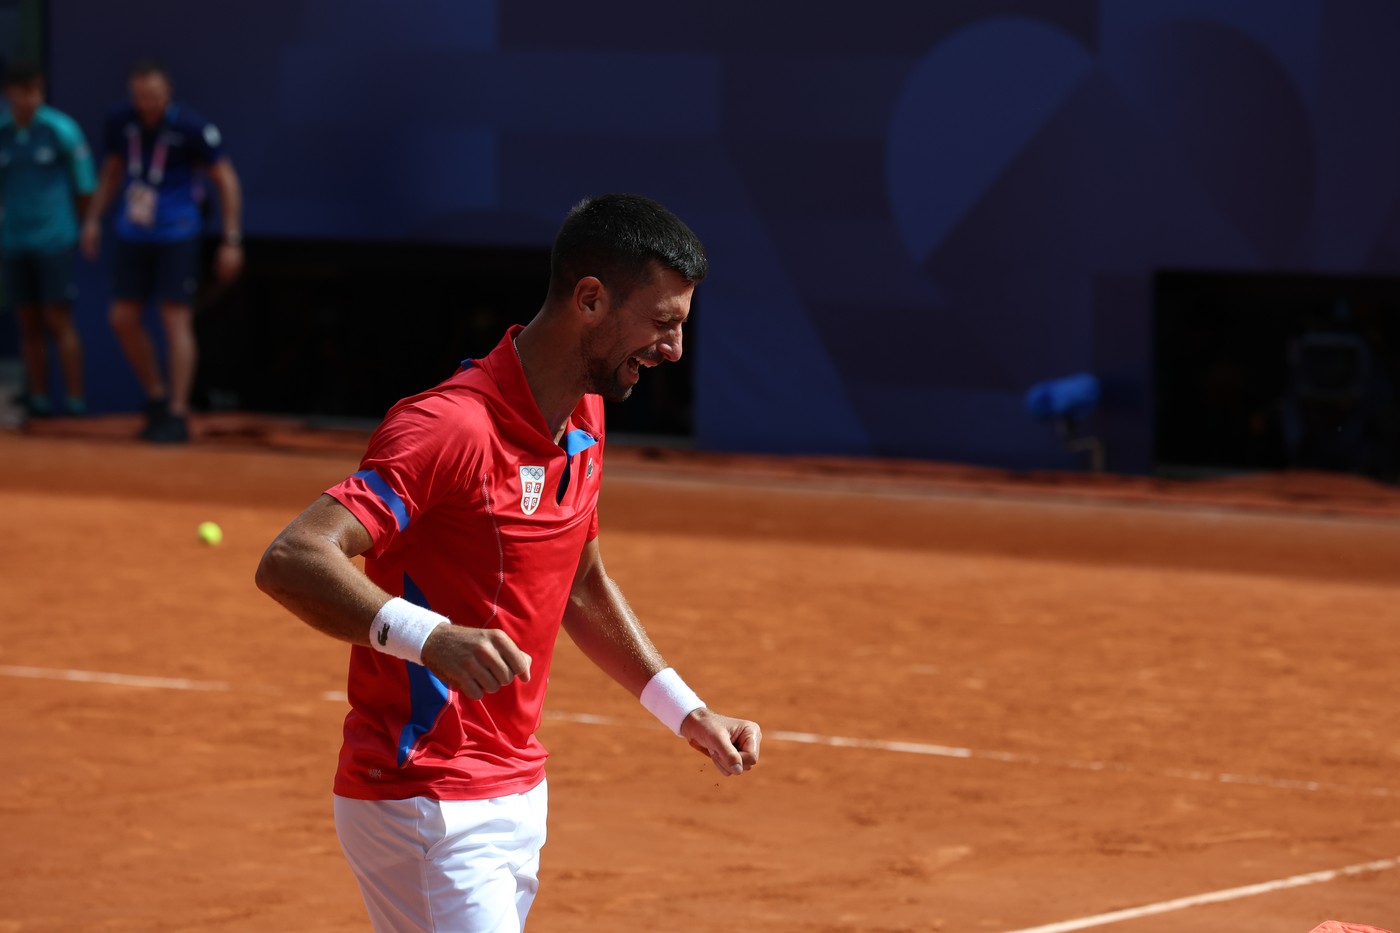 NOVAK DJOKOVIC of Serbia reacts to defeating CARLOS ALCARAZ of Spain, thus grabbing his elusive gold medal in the Tennis Men's Singles final at the Paris 2024 Olympic Games in Roland-Garros, France
Paris 2024: Tennis, Ile-De-France, France - 04 Aug 2024,Image: 895907091, License: Rights-managed, Restrictions: , Model Release: no